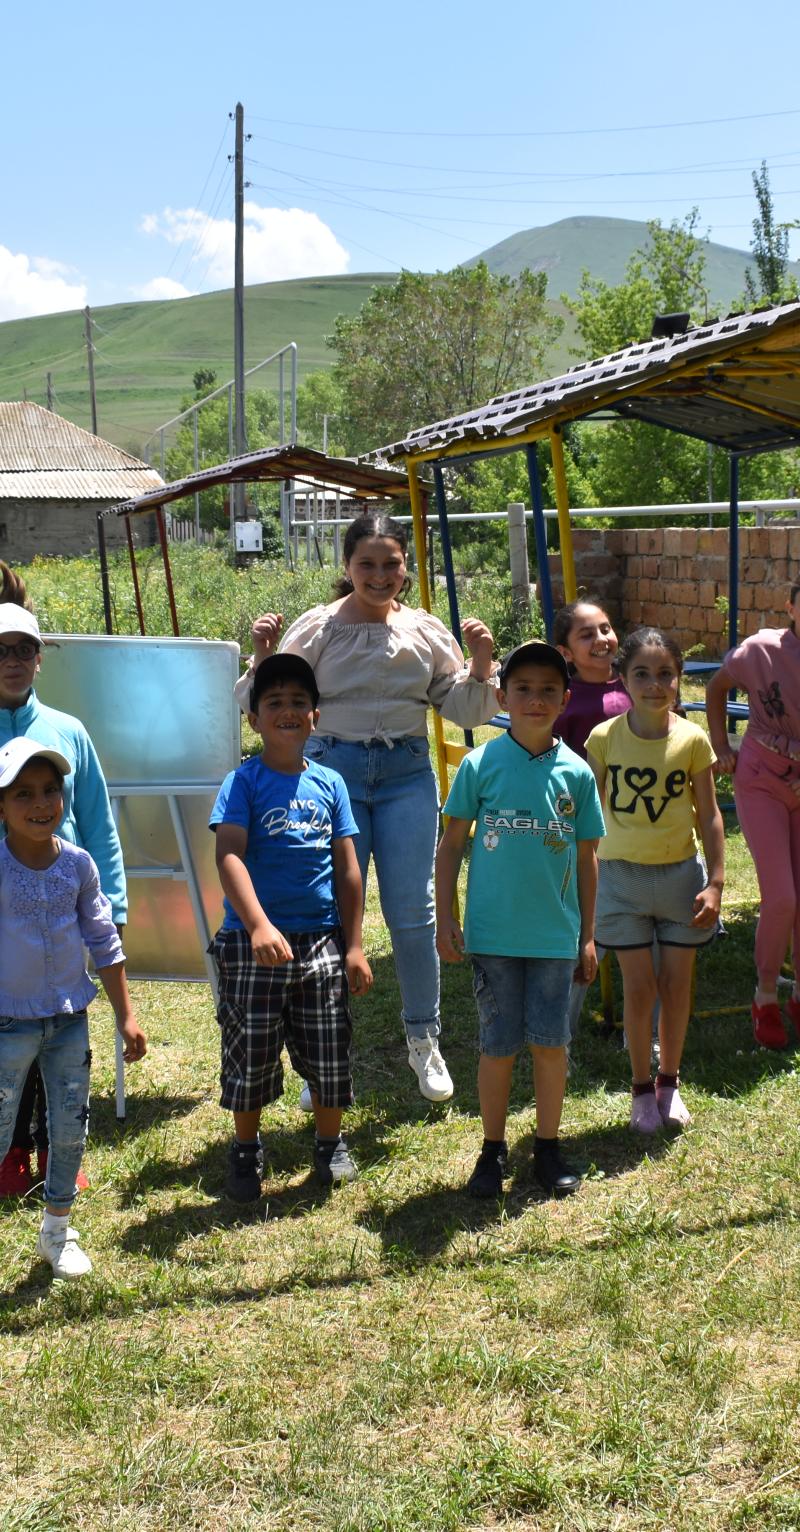 A group of ten children are standing together outside in the grass wearing casual clothes. A few of the children are jumping in the air with big smiles on their faces. The others are also smiling and looking happy. There is playground equipment, buildings, and mountains in the background